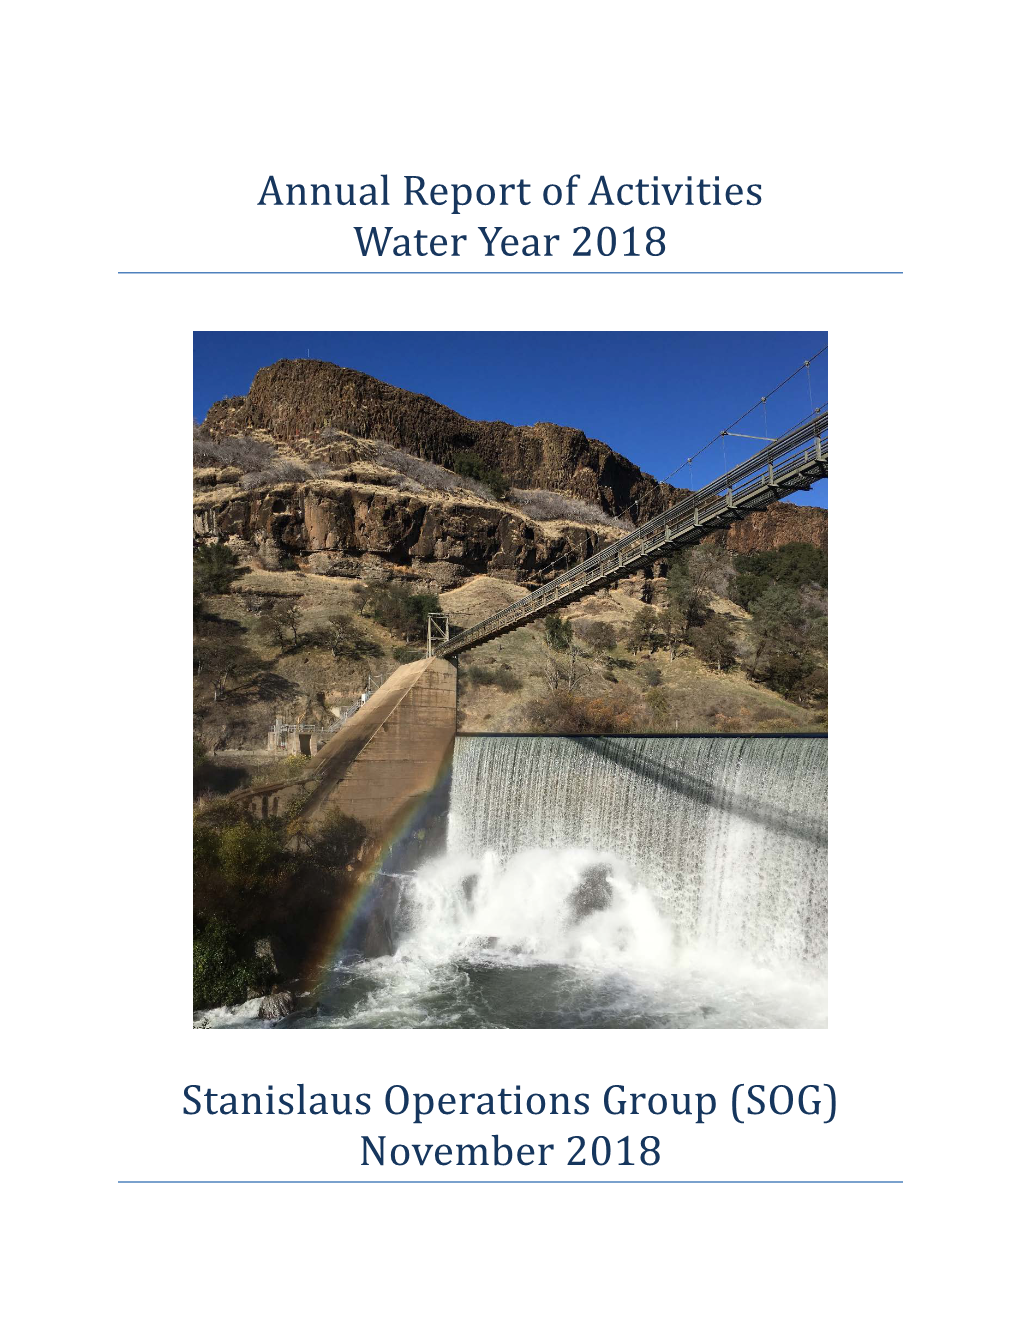 Annual Report of Activities Water Year 2018